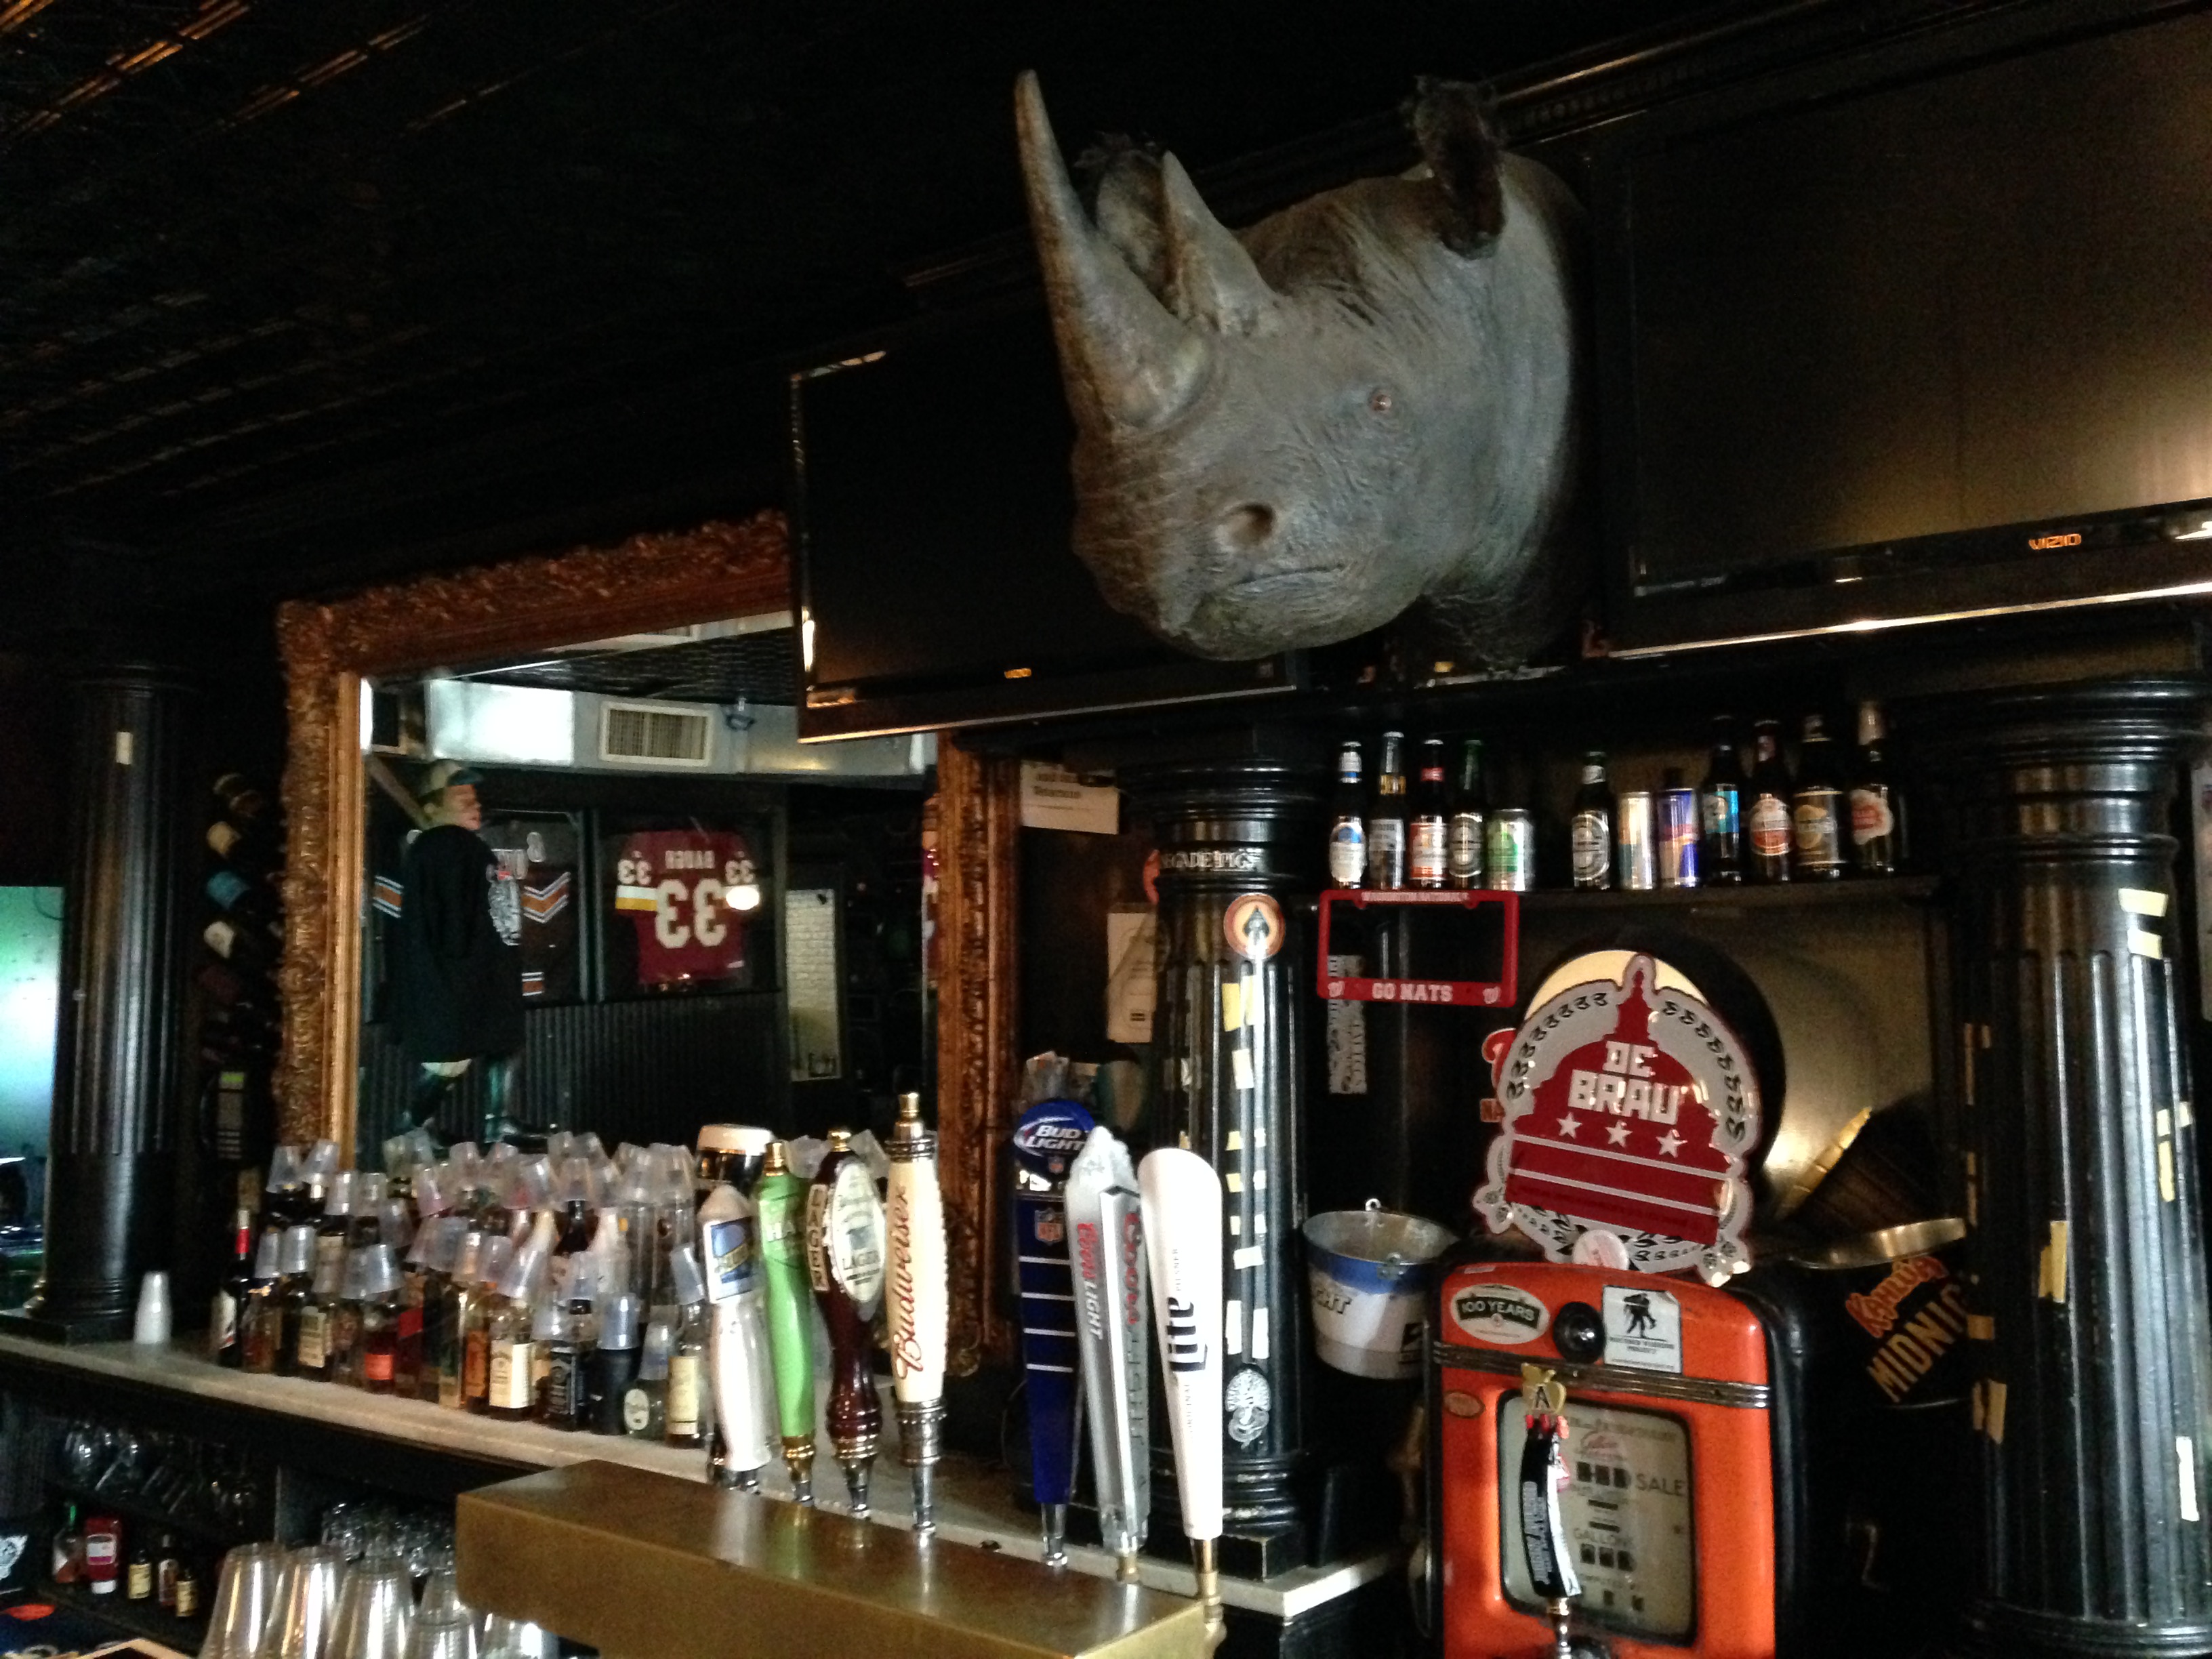 Online auction offers Rhino Bar goods for sale